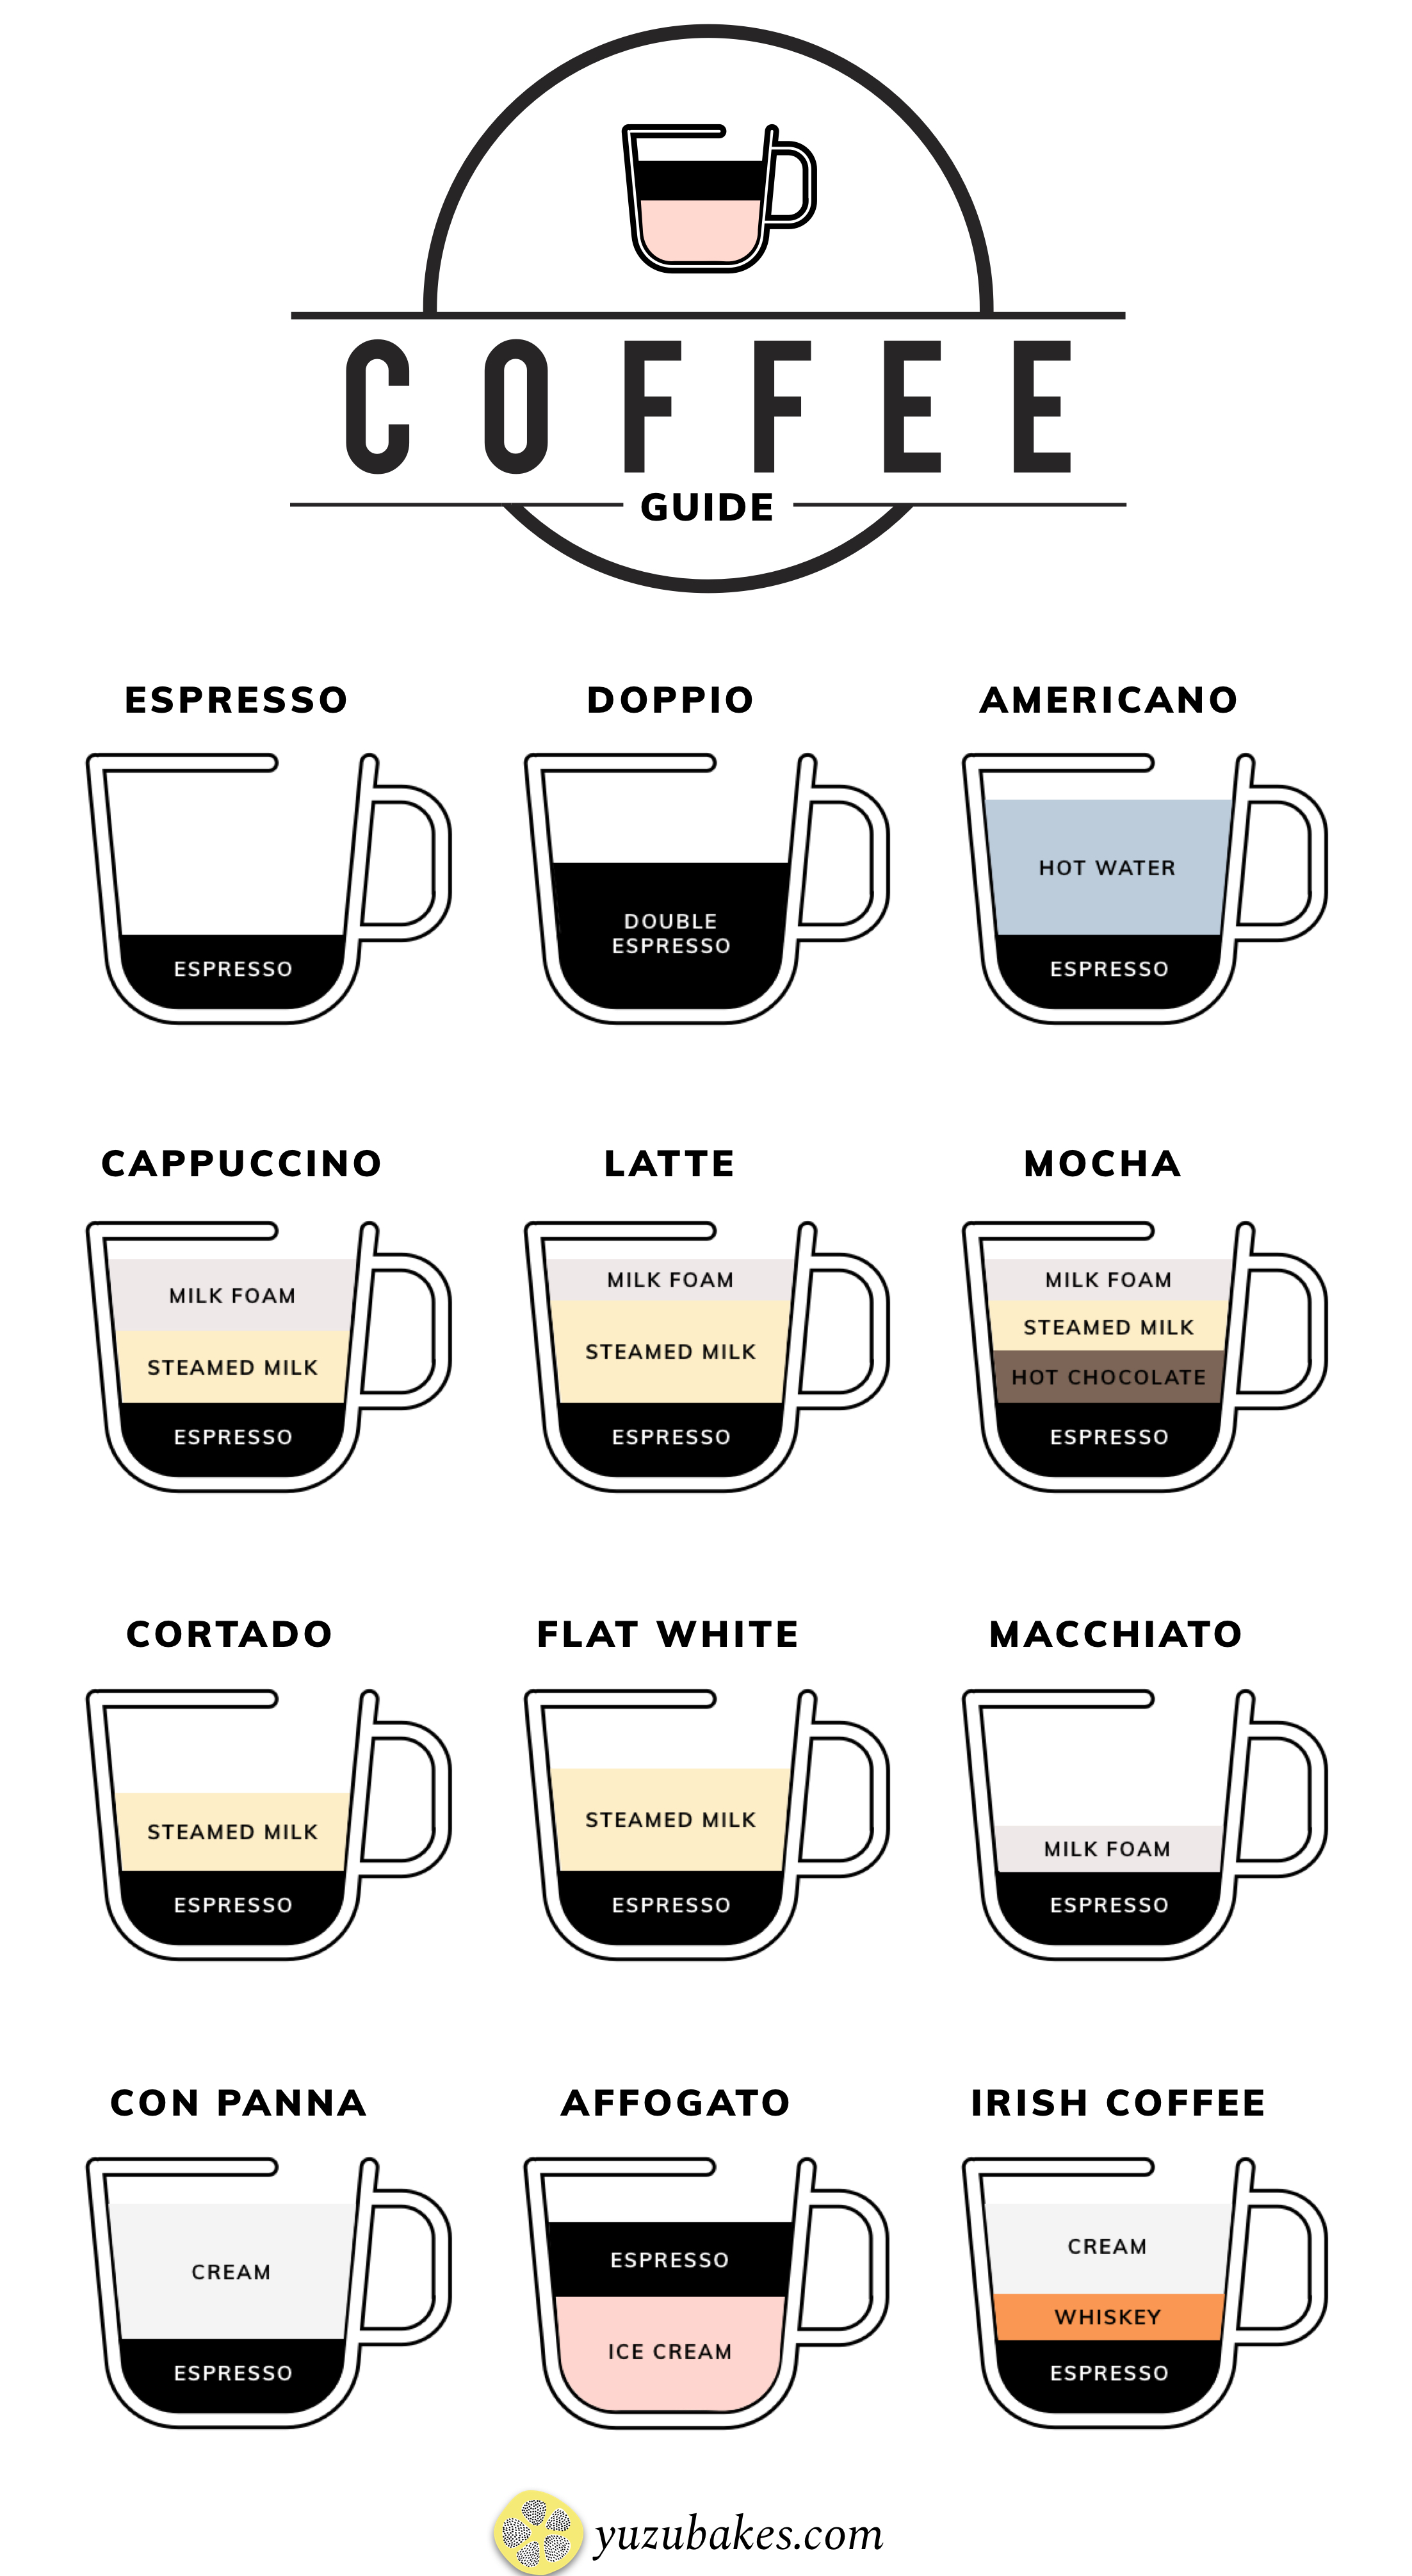 Coffee Cup Guide - Types & Size of Coffee Cups